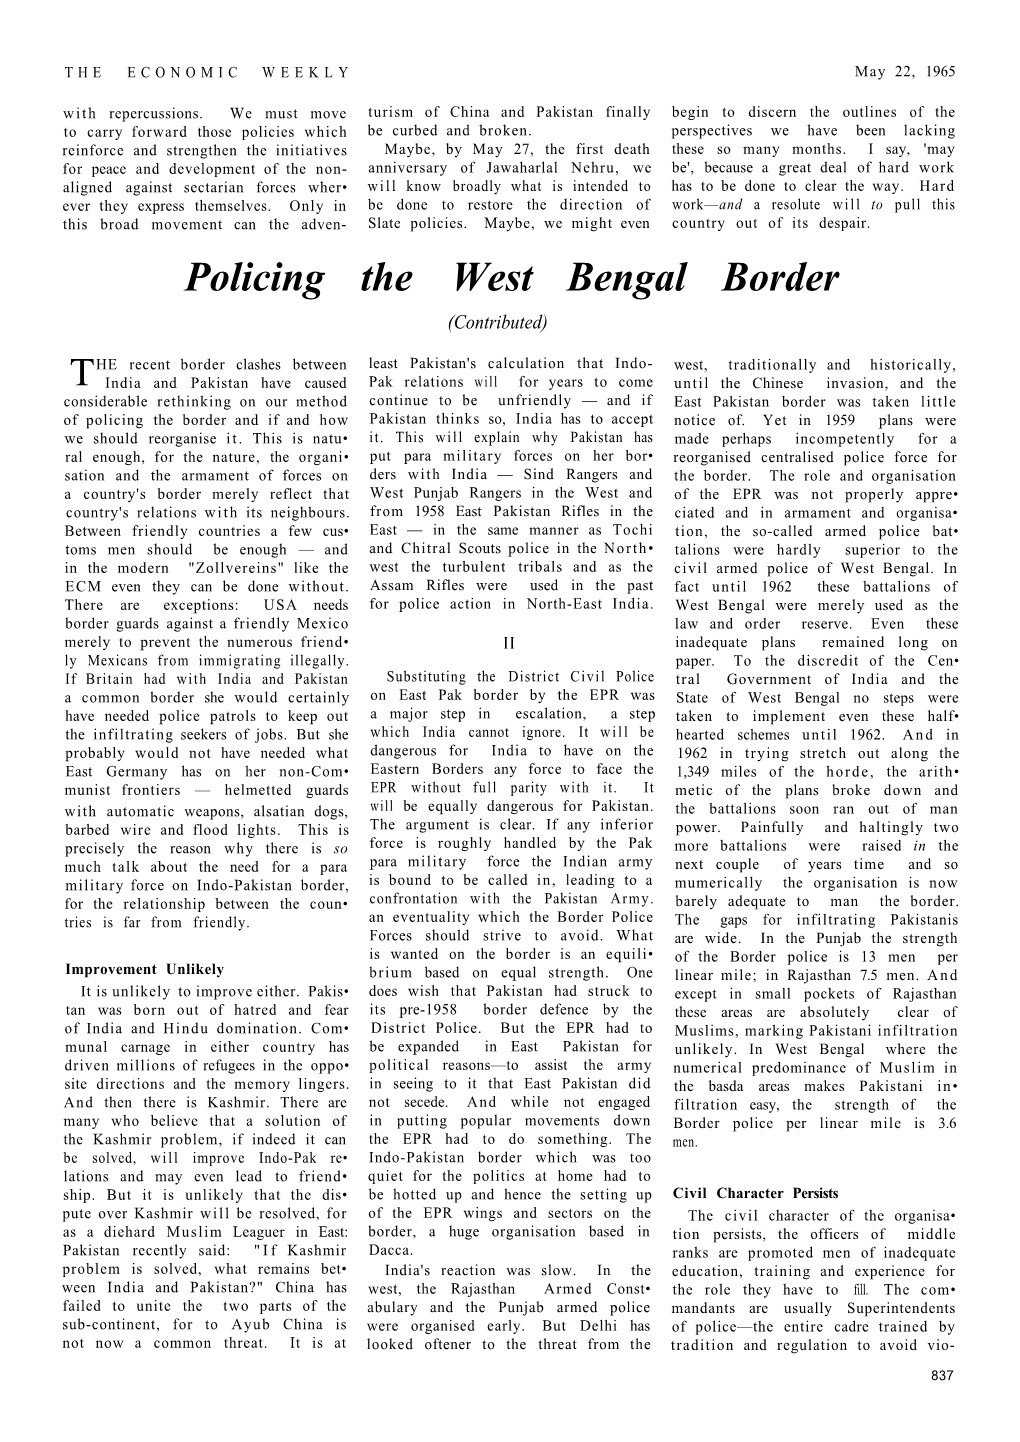 Policing the West Bengal Border (Contributed)